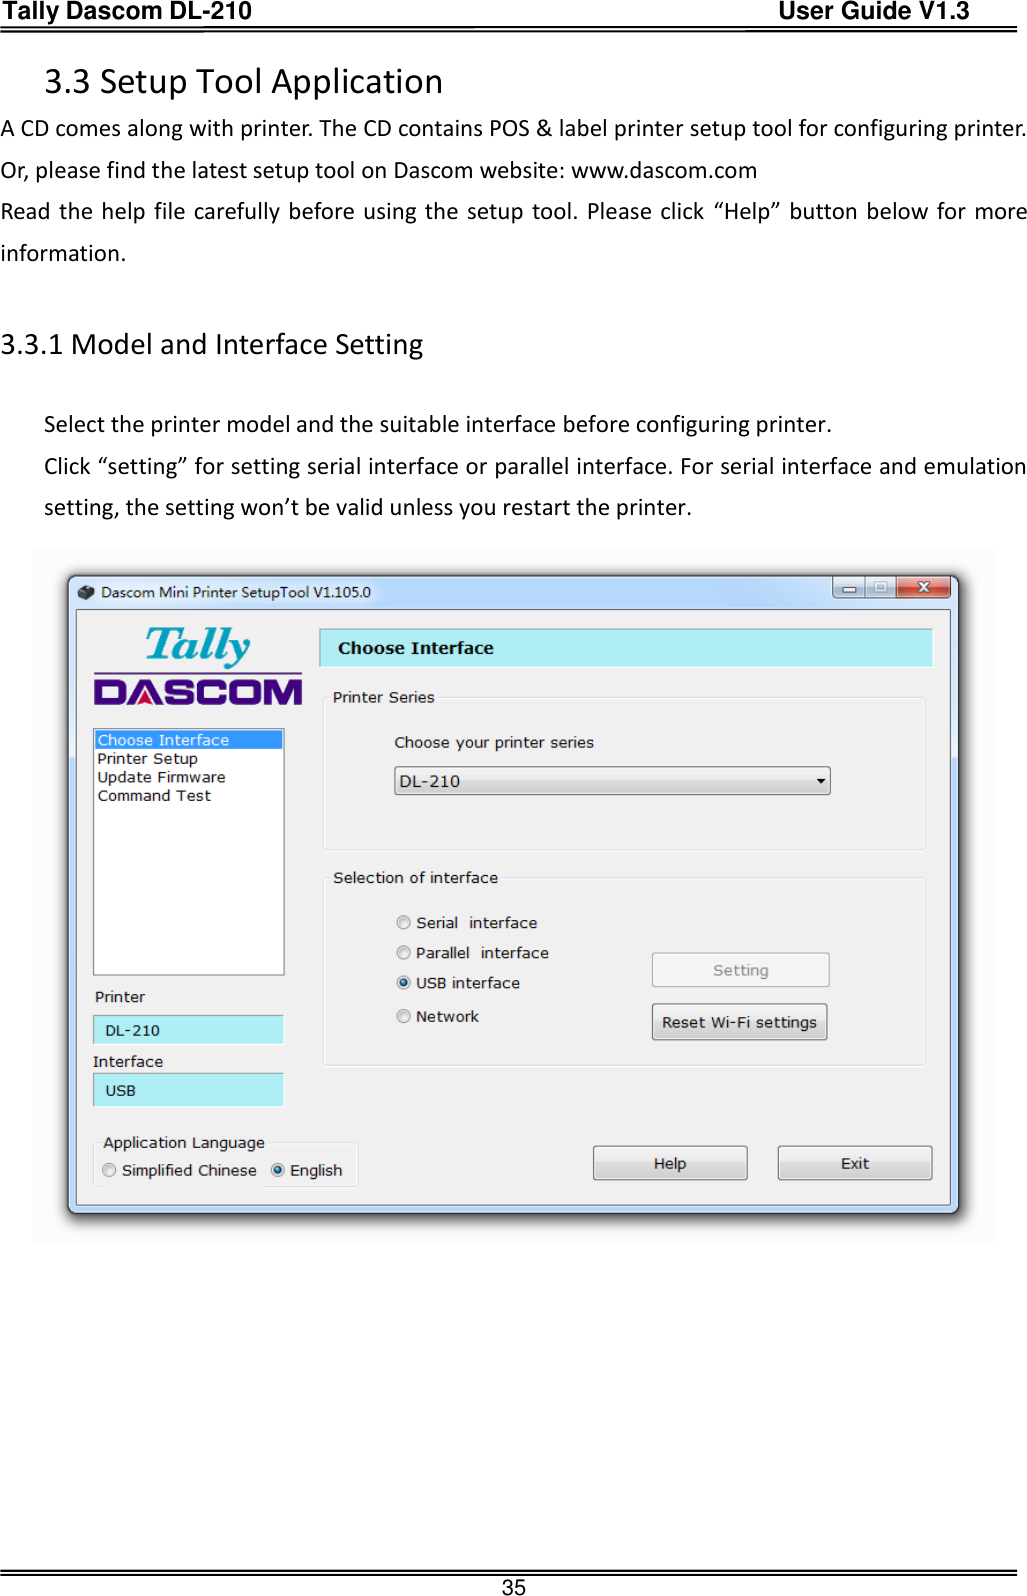 Tally Dascom DL-210                                          User Guide V1.3  35 3.3 Setup Tool Application A CD comes along with printer. The CD contains POS &amp; label printer setup tool for configuring printer. Or, please find the latest setup tool on Dascom website: www.dascom.com Read the help file carefully before using the setup tool. Please click  “Help” button below for more information.  3.3.1 Model and Interface Setting  Select the printer model and the suitable interface before configuring printer. Click “setting” for setting serial interface or parallel interface. For serial interface and emulation setting, the setting won’t be valid unless you restart the printer.         